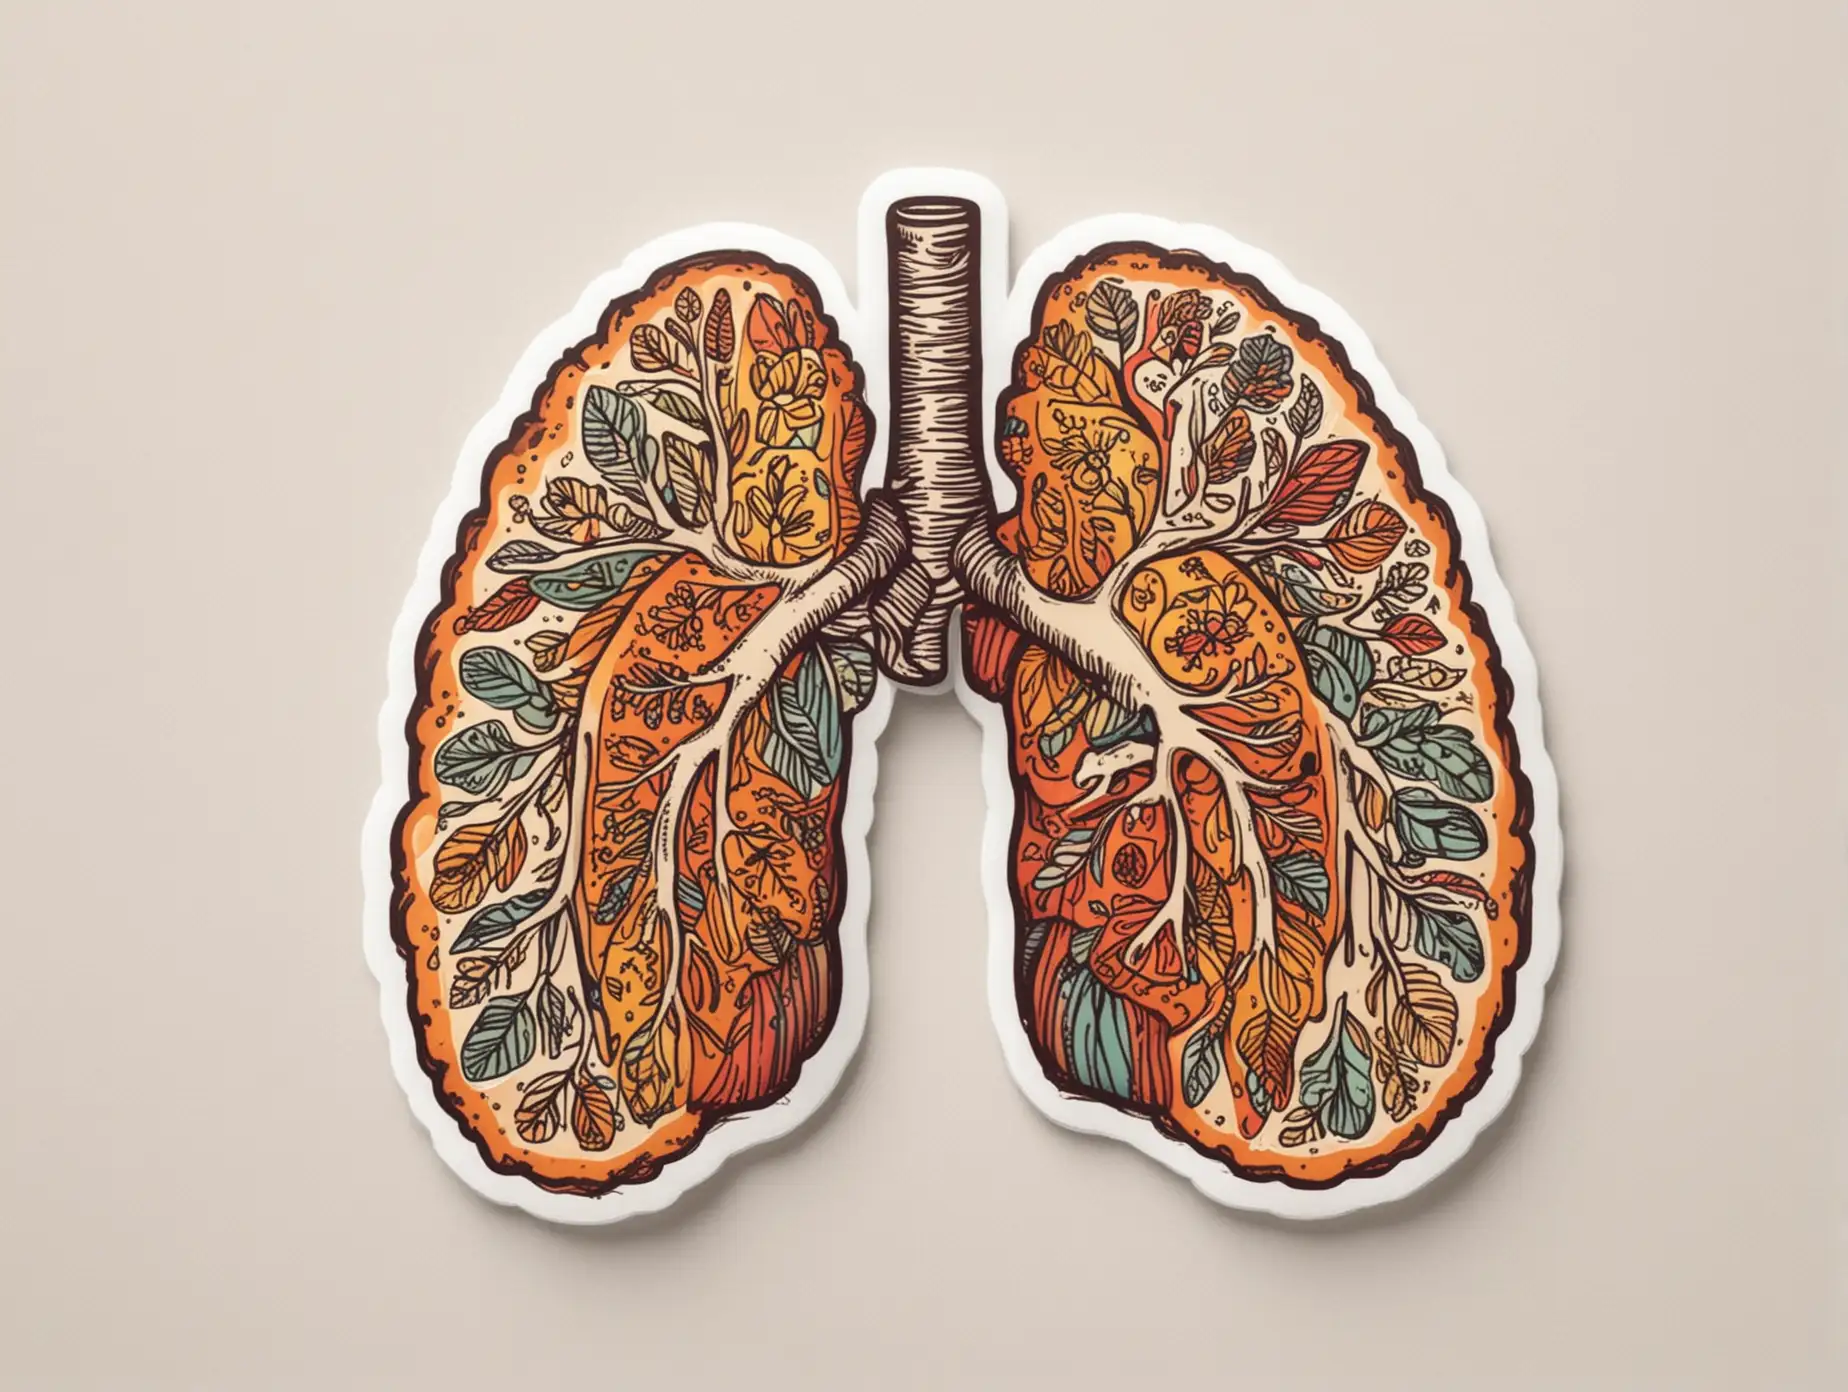 Cheerful Lungs Sticker in Warm Colors Detailed Vector Art on White Background